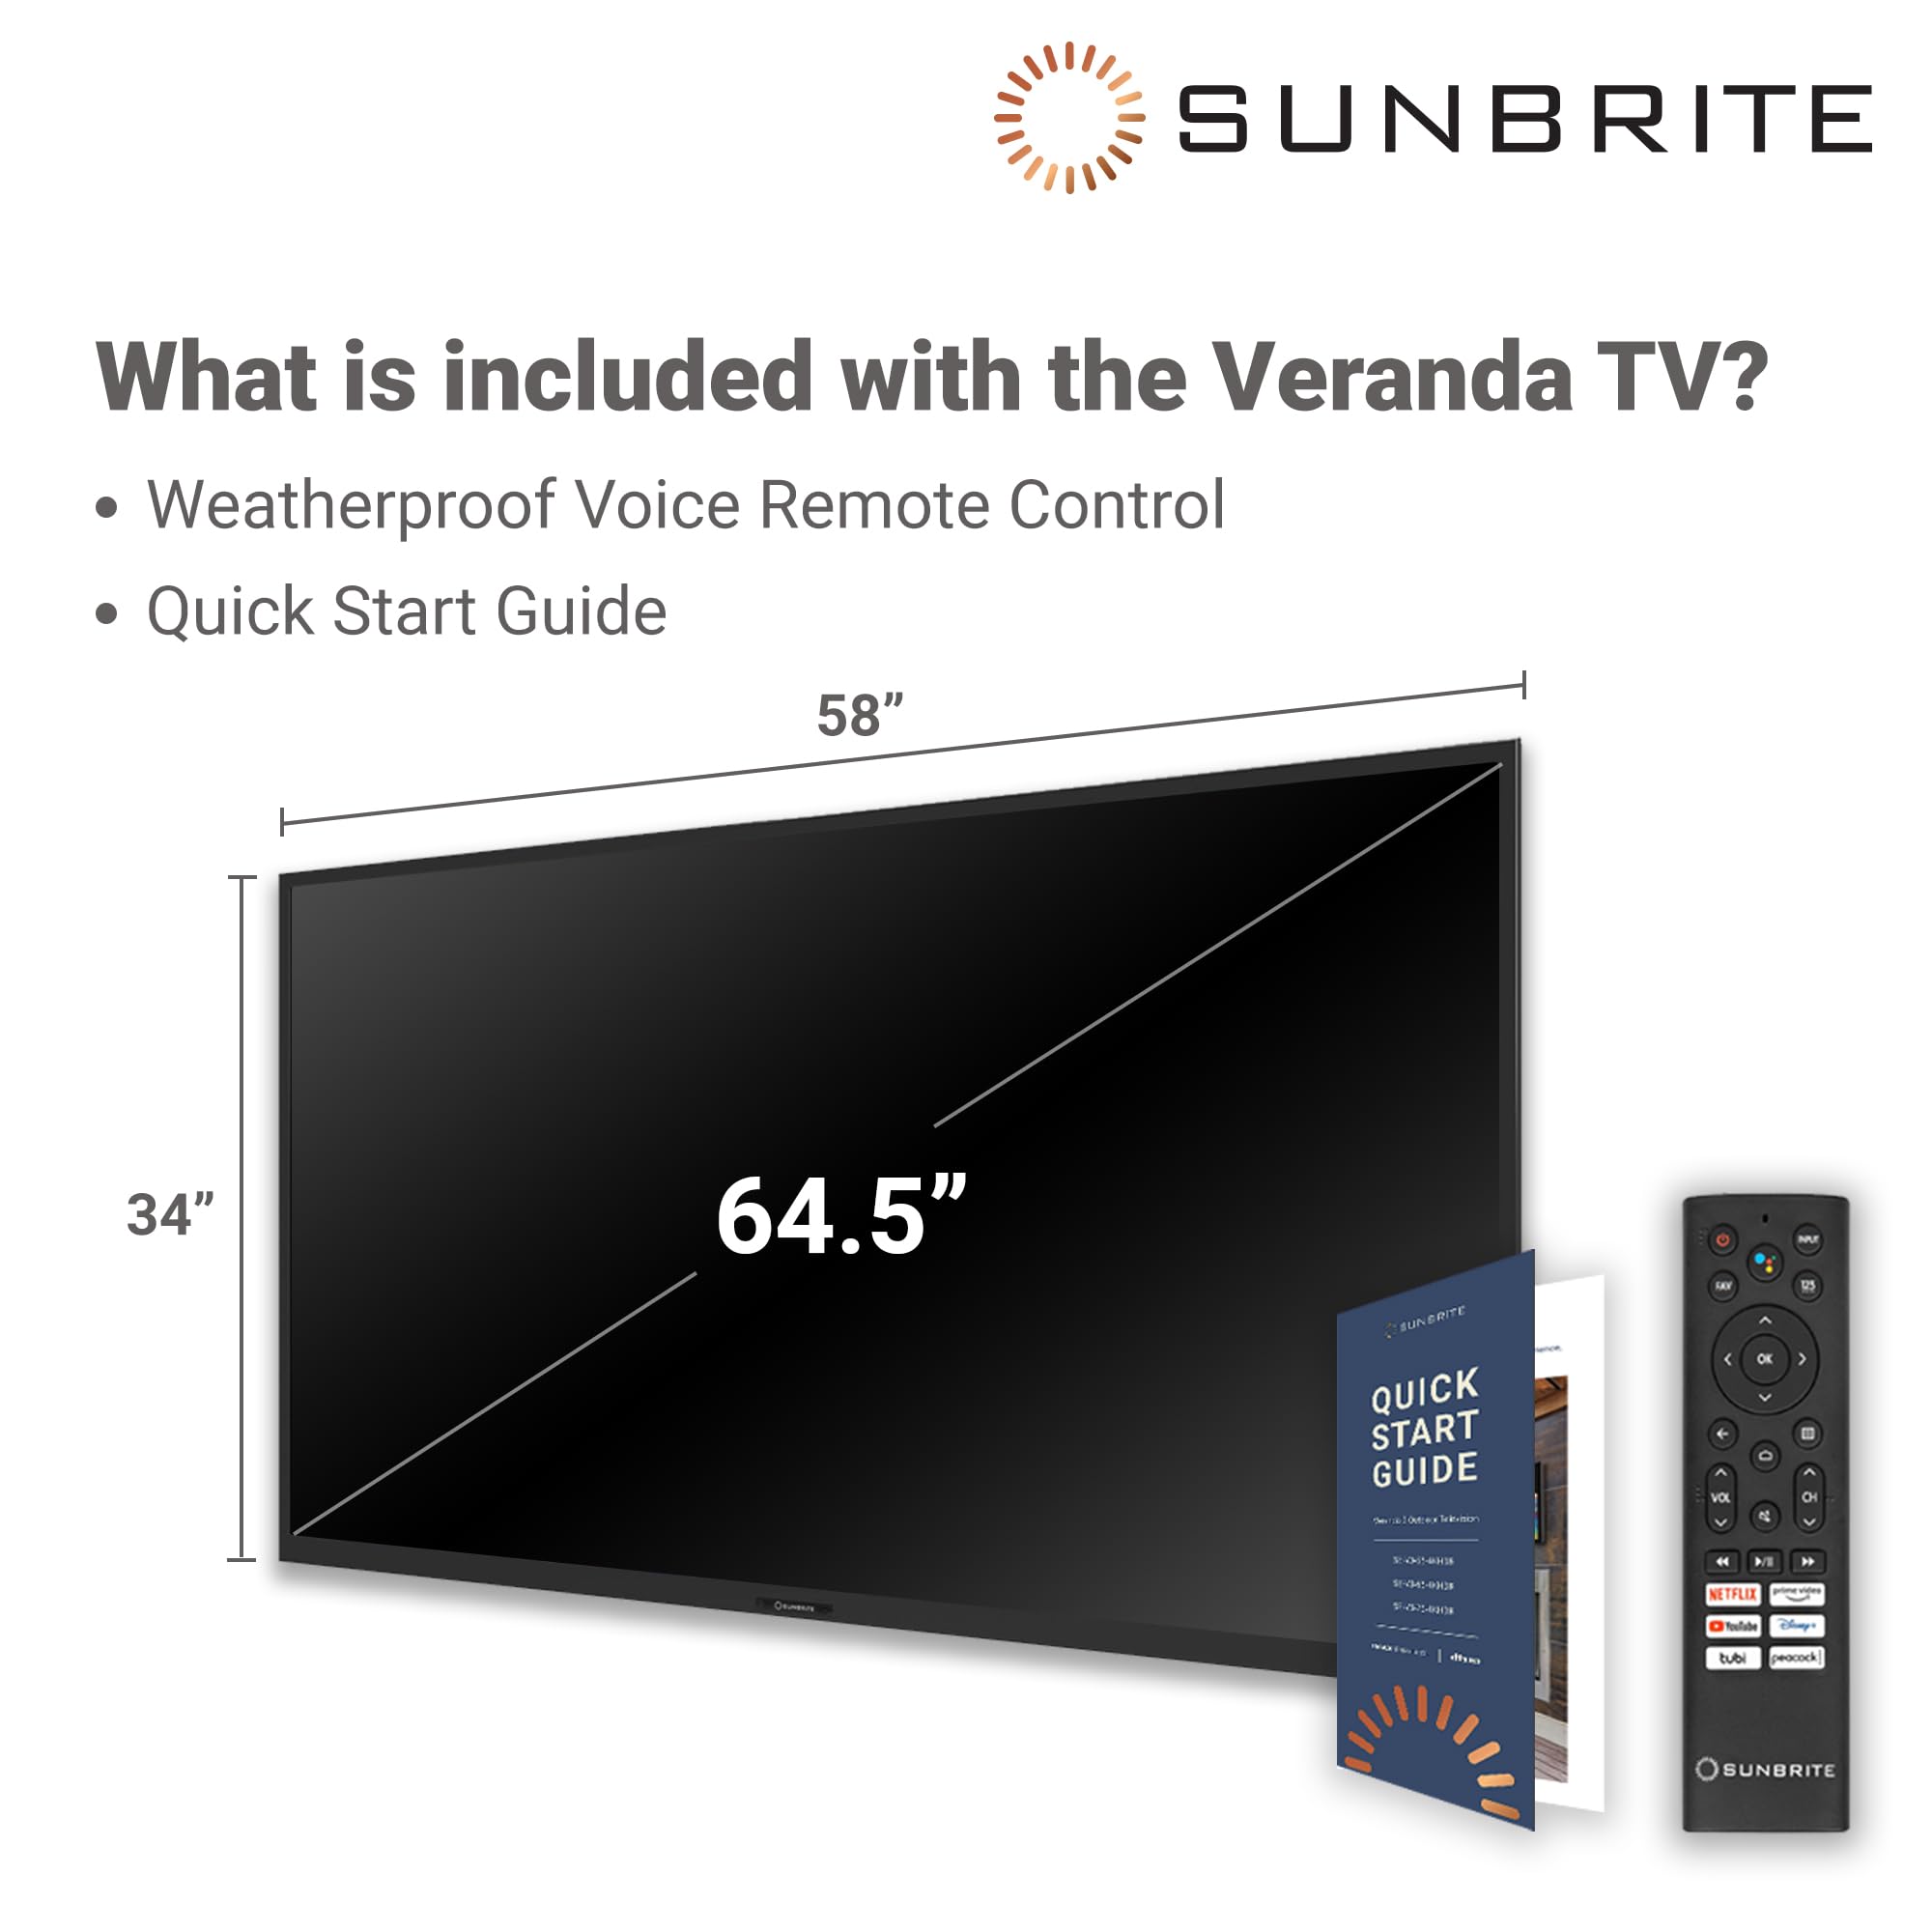 SunBrite Veranda 3 Series 65-inch Full Shade Smart Outdoor TV (2022) | 4K Ultra HD HDR QLED Weatherproof Television - 1,000 nit Ultra Bright Screen with All-Weather Voice Remote (SB-V3-65-4KHDR-BL)